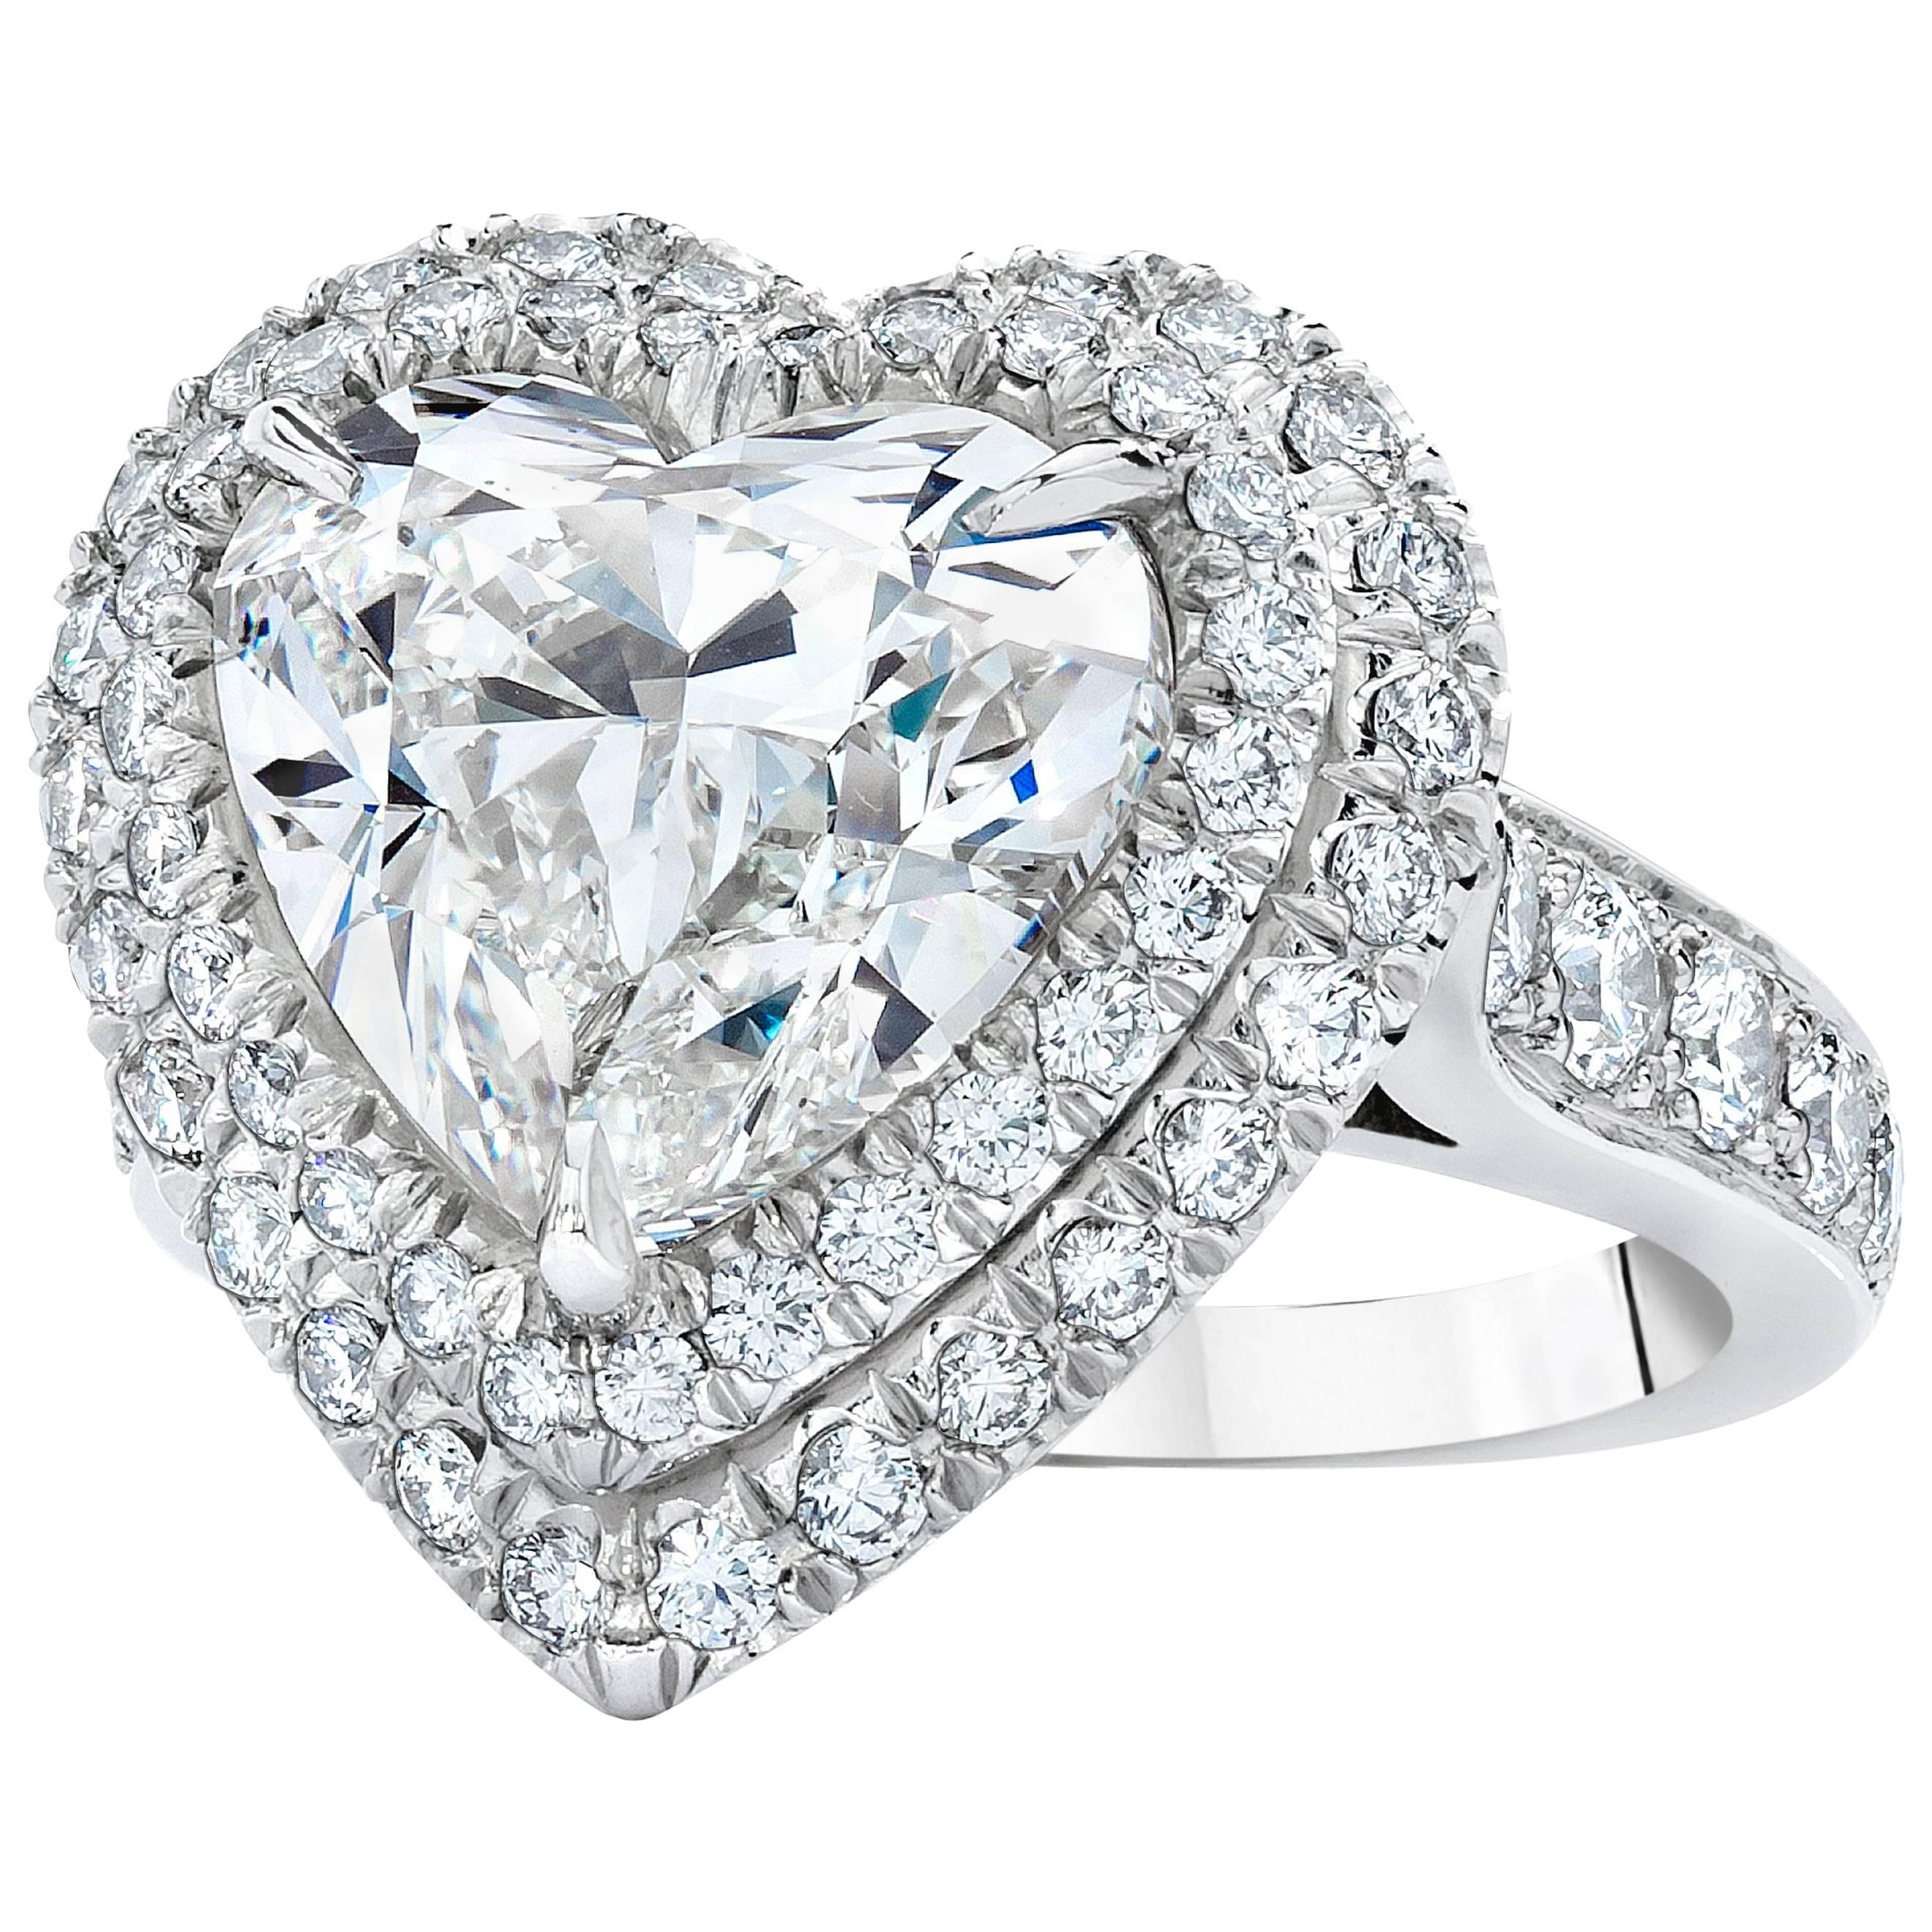 GIA Certified Heart-Shaped 5.01 carat Diamond Halo Engagement Ring For Sale